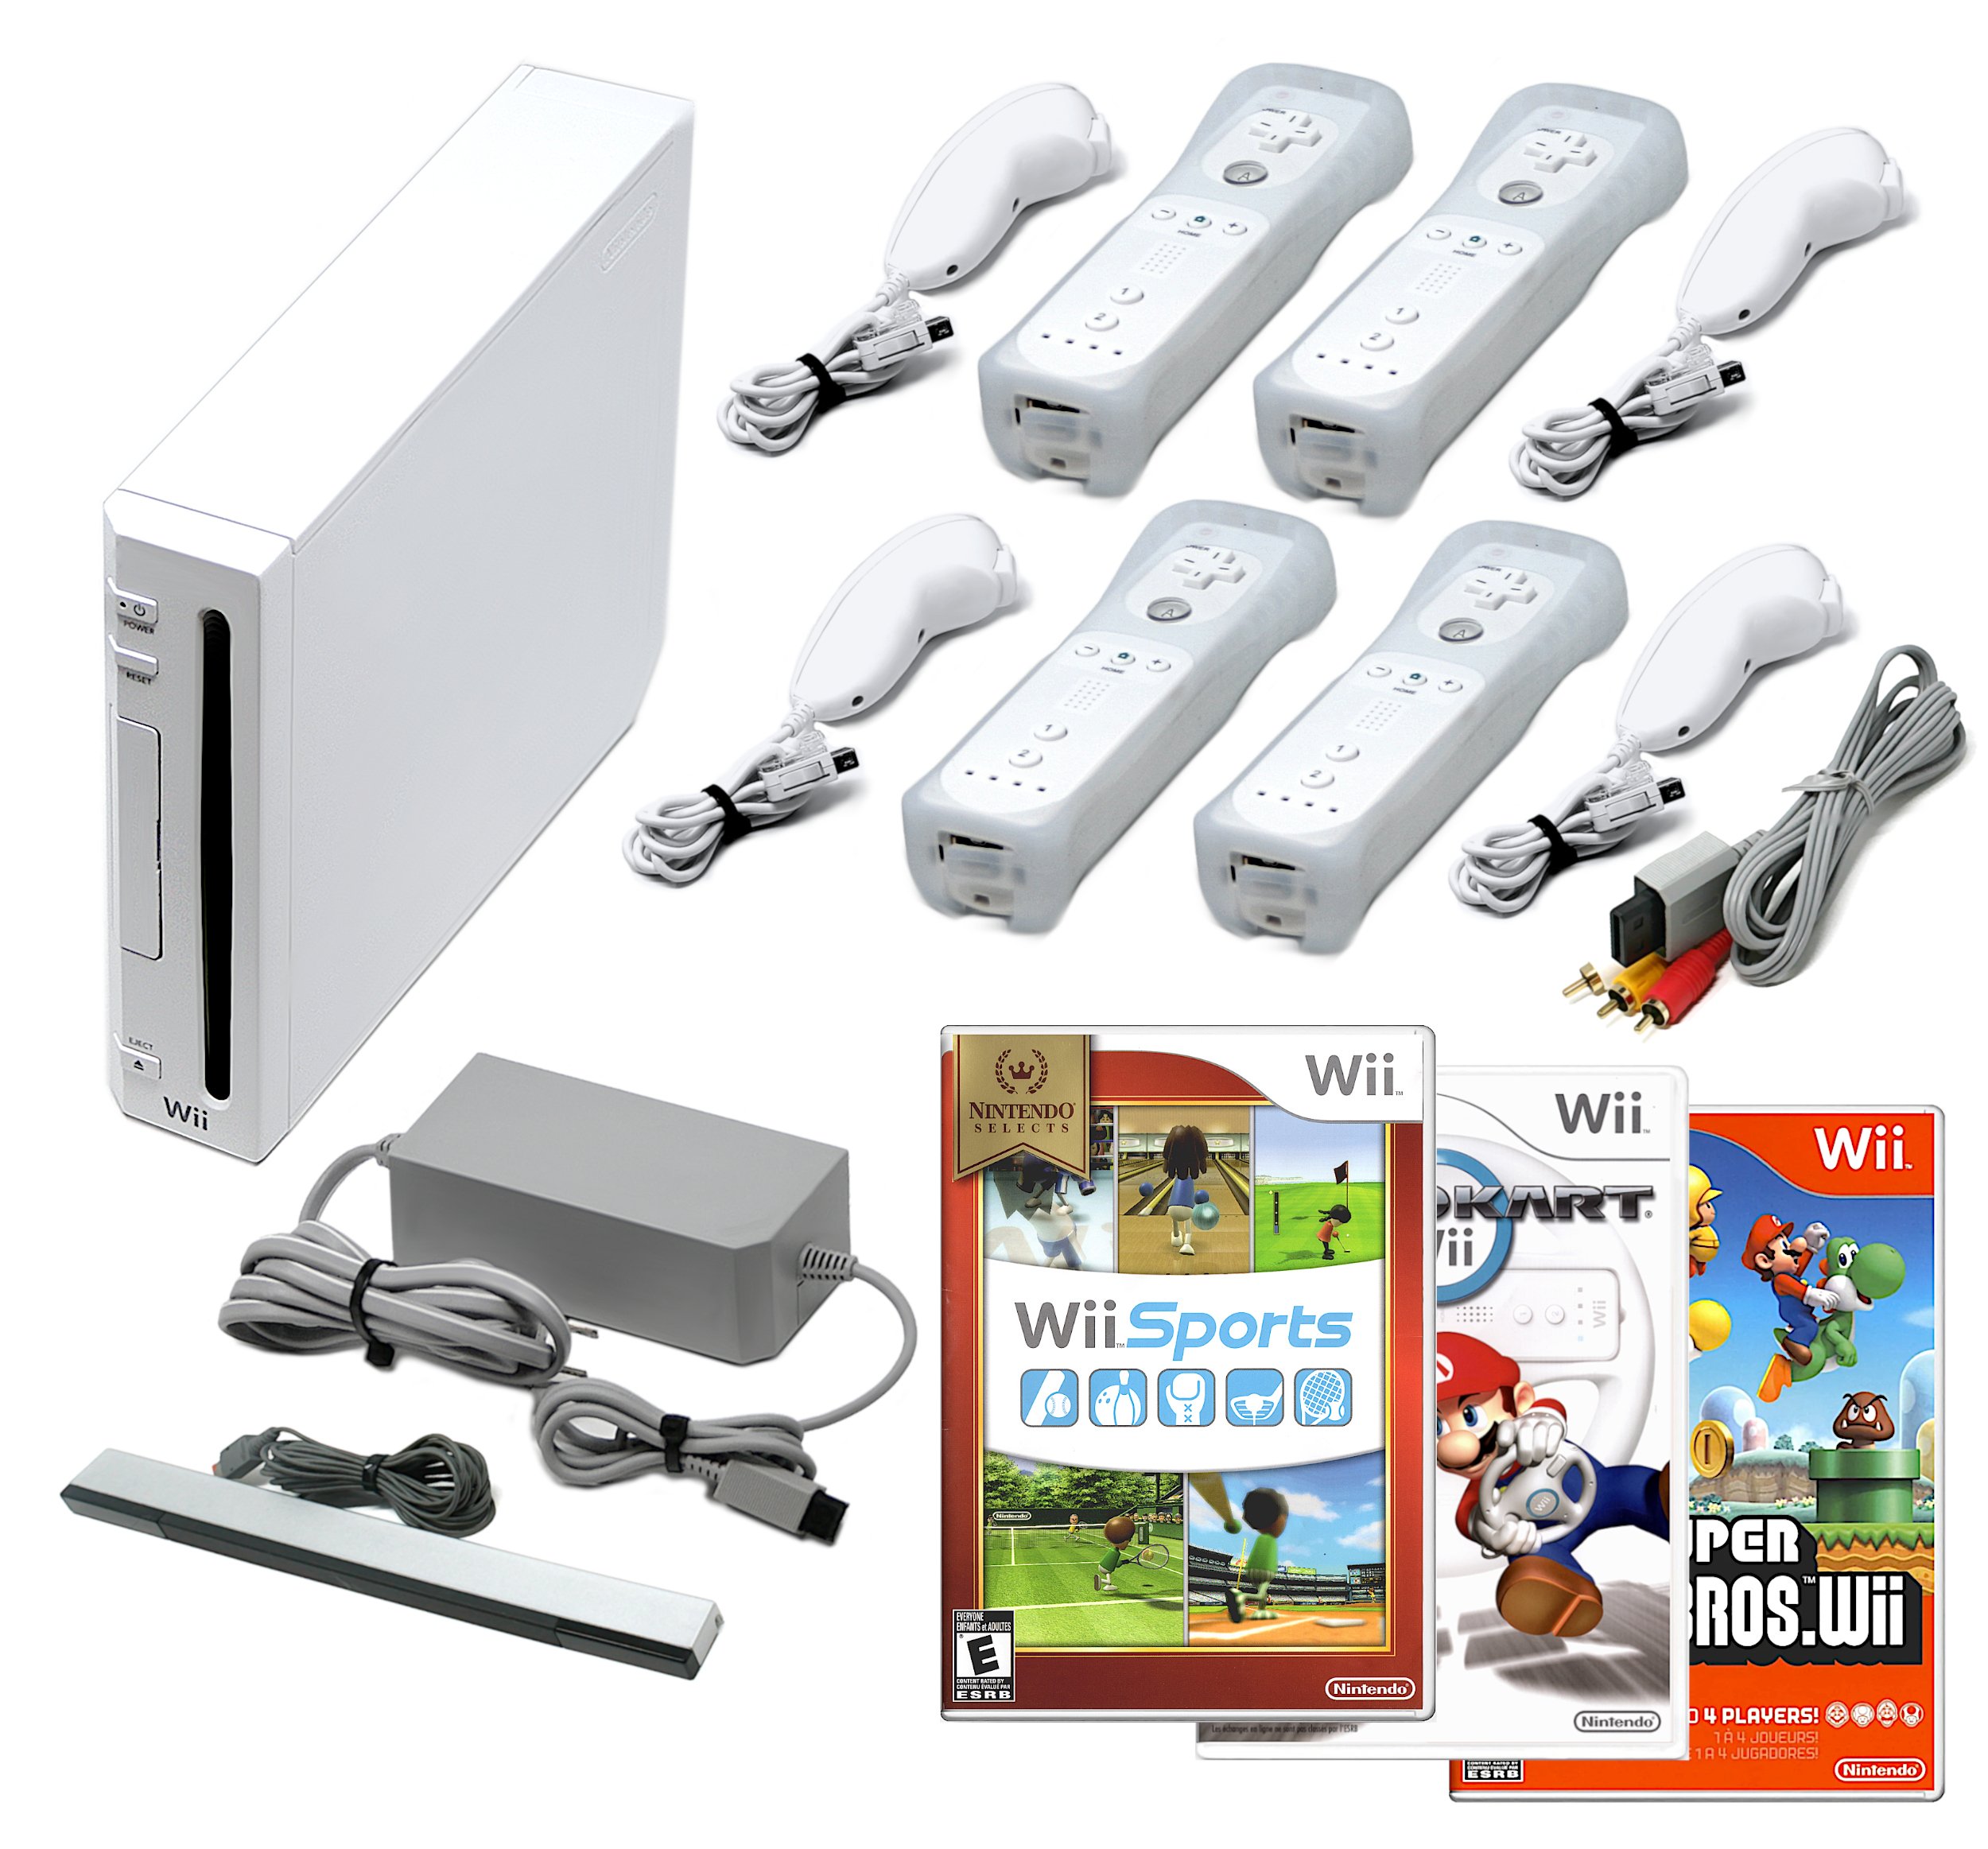 Nintendo Wii Game Console + Pick 1 to 4 Remotes + Pick Wii Sports, Mario Kart, or New Super Mario Bros + US Seller